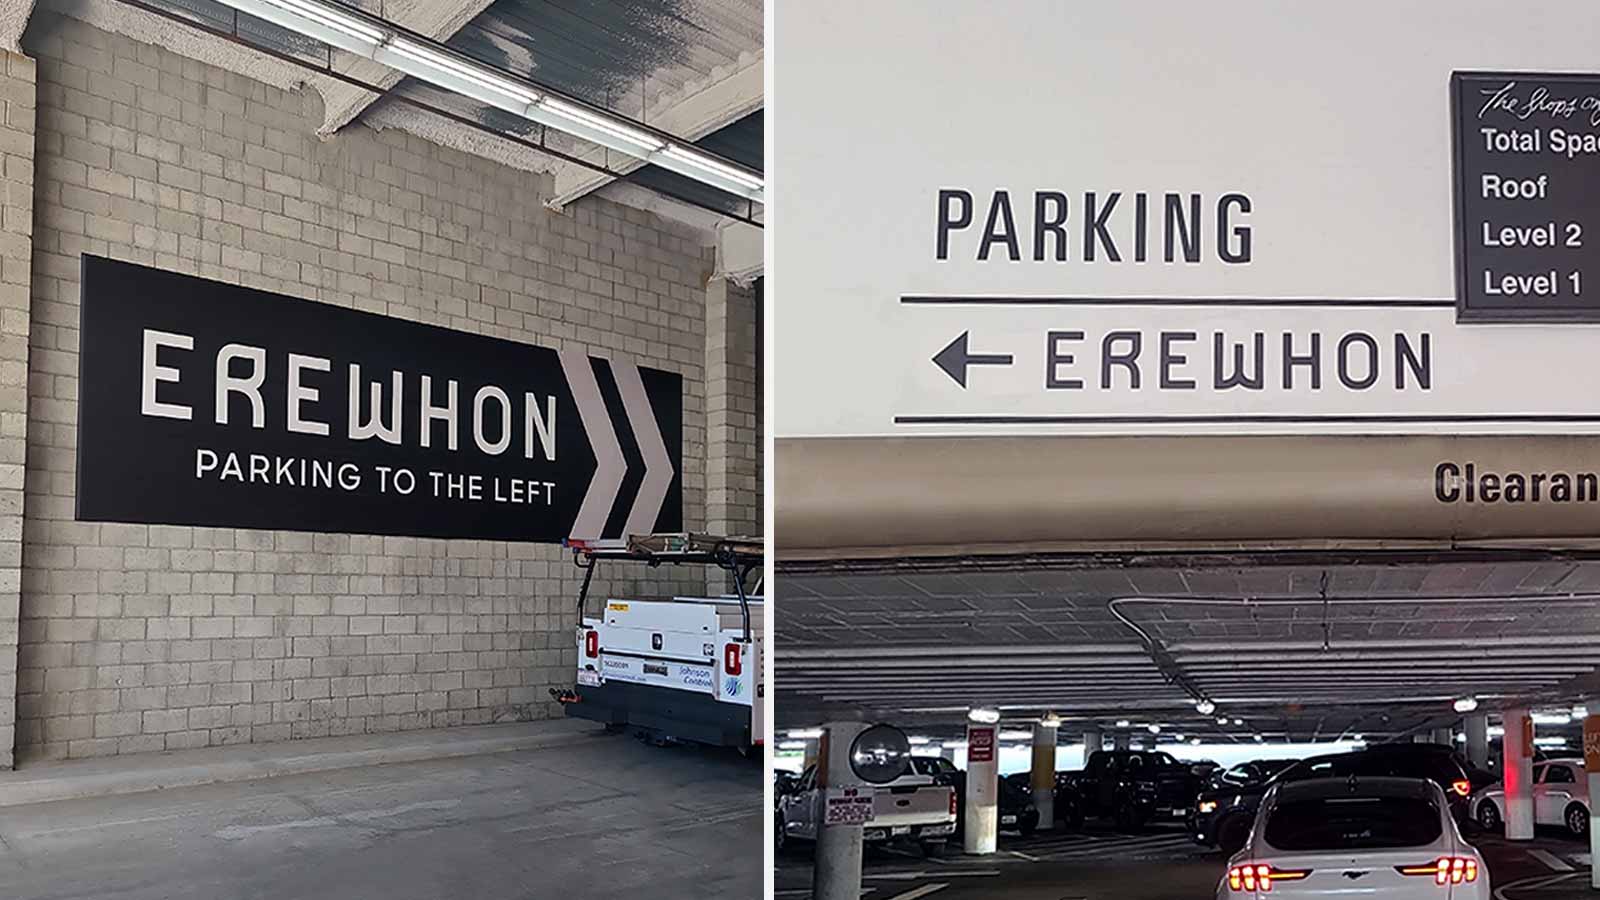 erewhon wayfinding signs installed in the parking lot